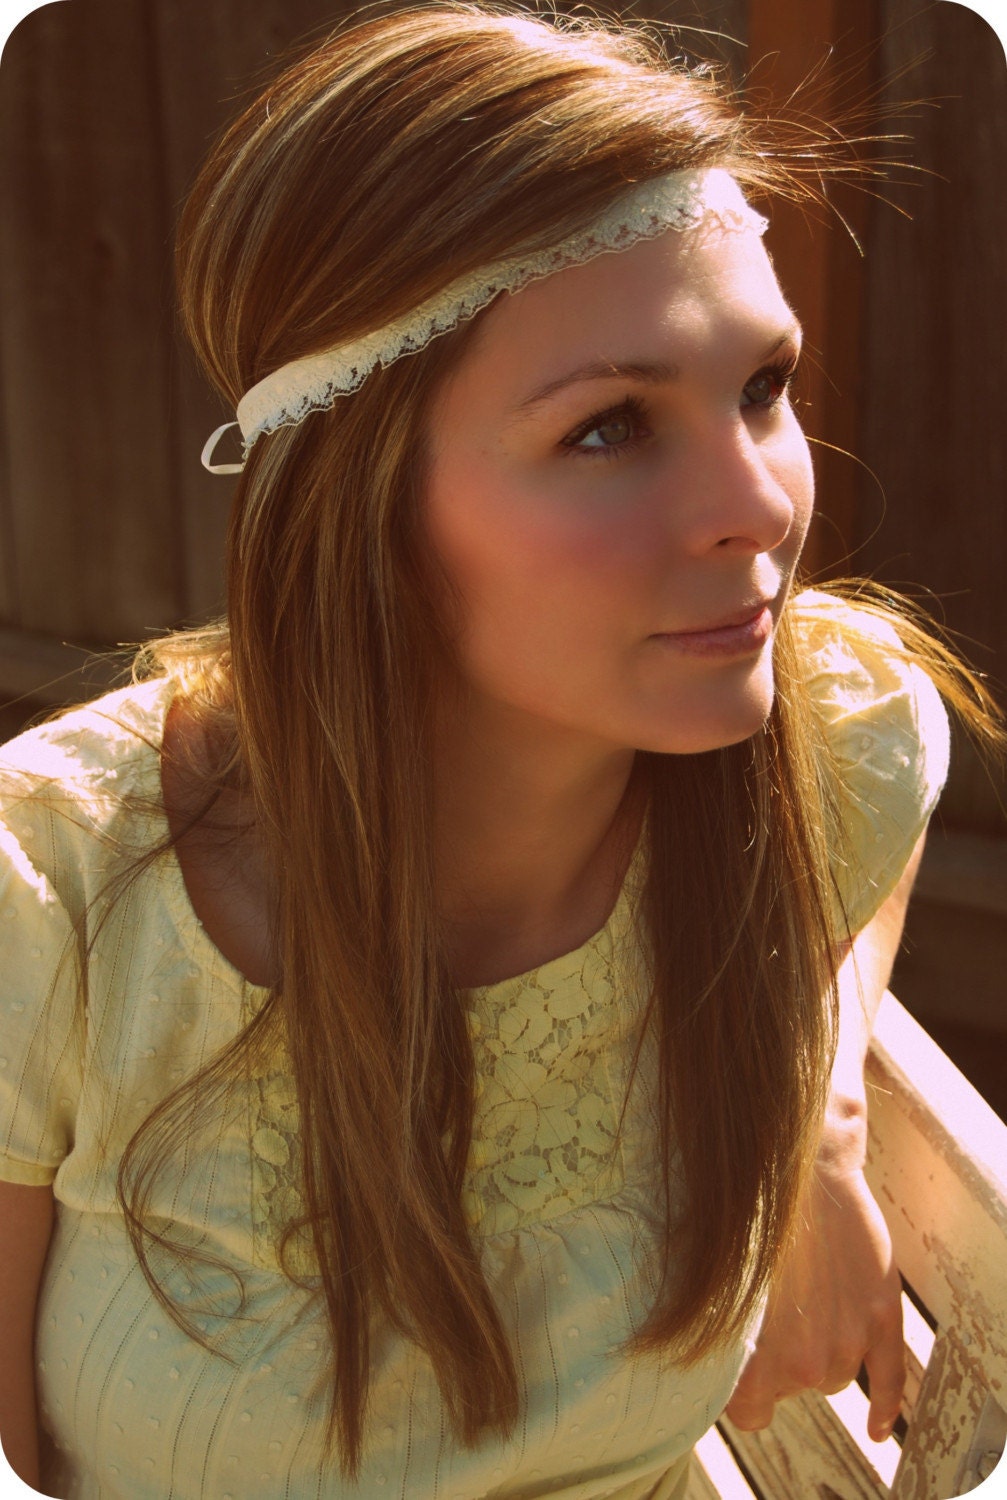 Vintage Lace Hippie Headband From peacelovevintageshop